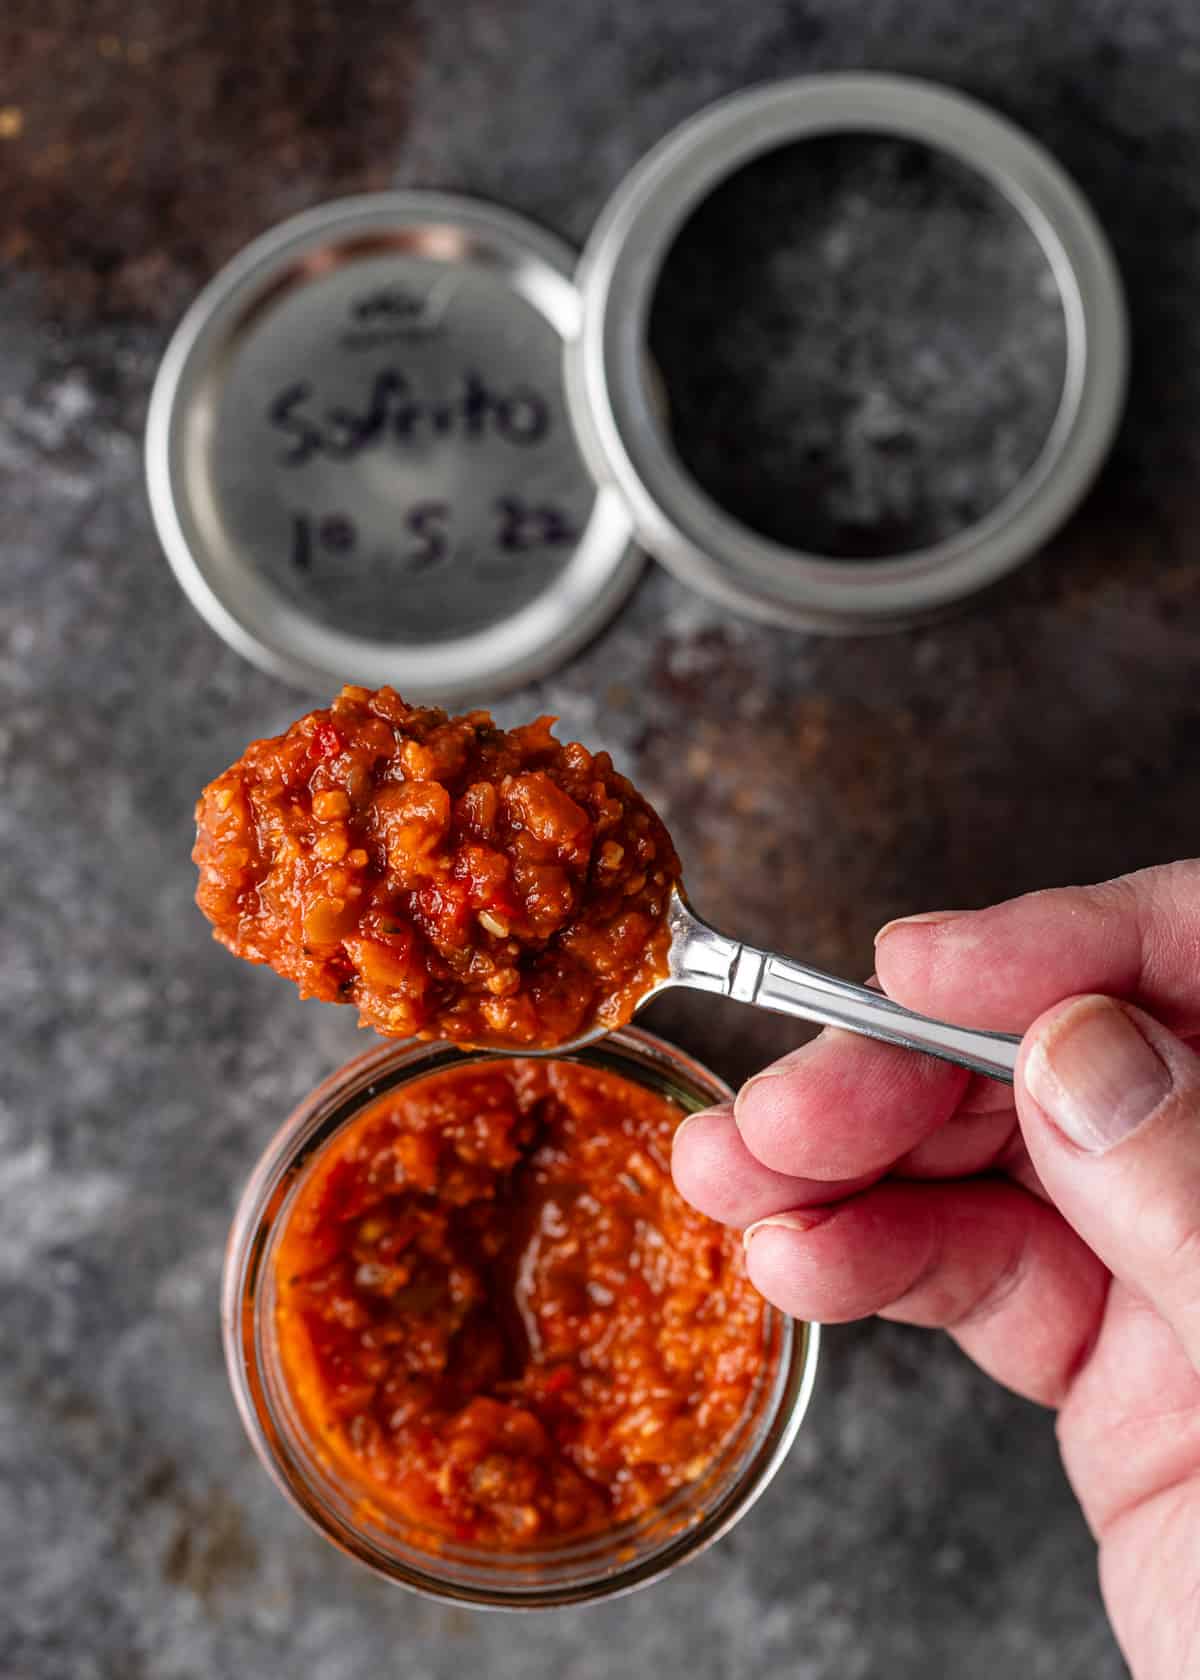 processed red sofrito from canned jar on spoon